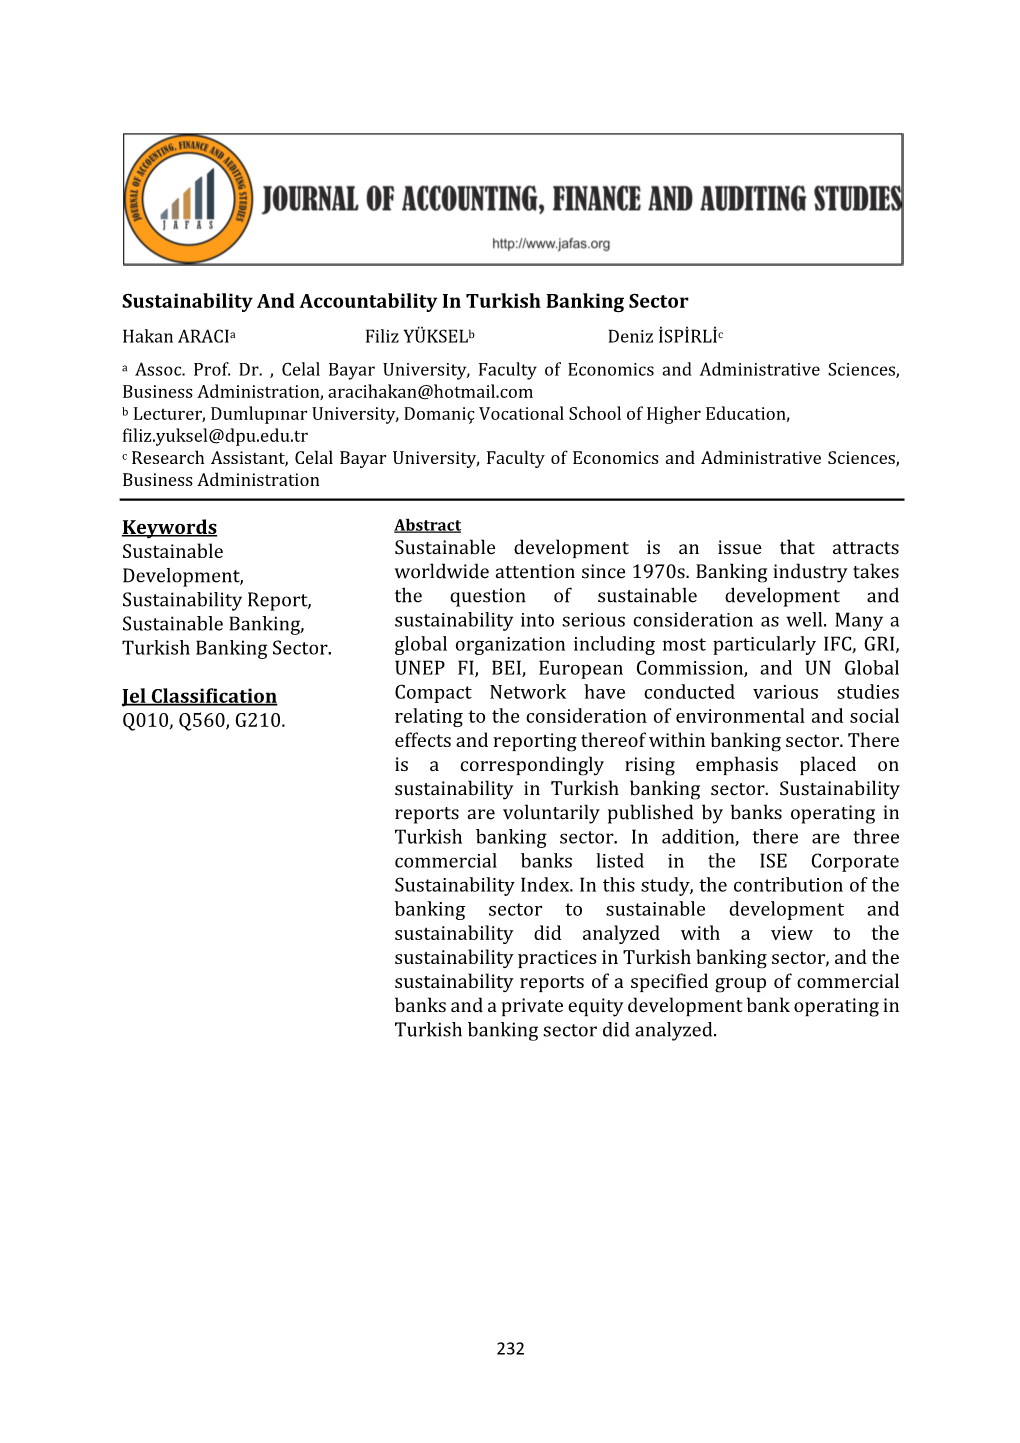 Sustainability and Accountability in Turkish Banking Sector Keywords